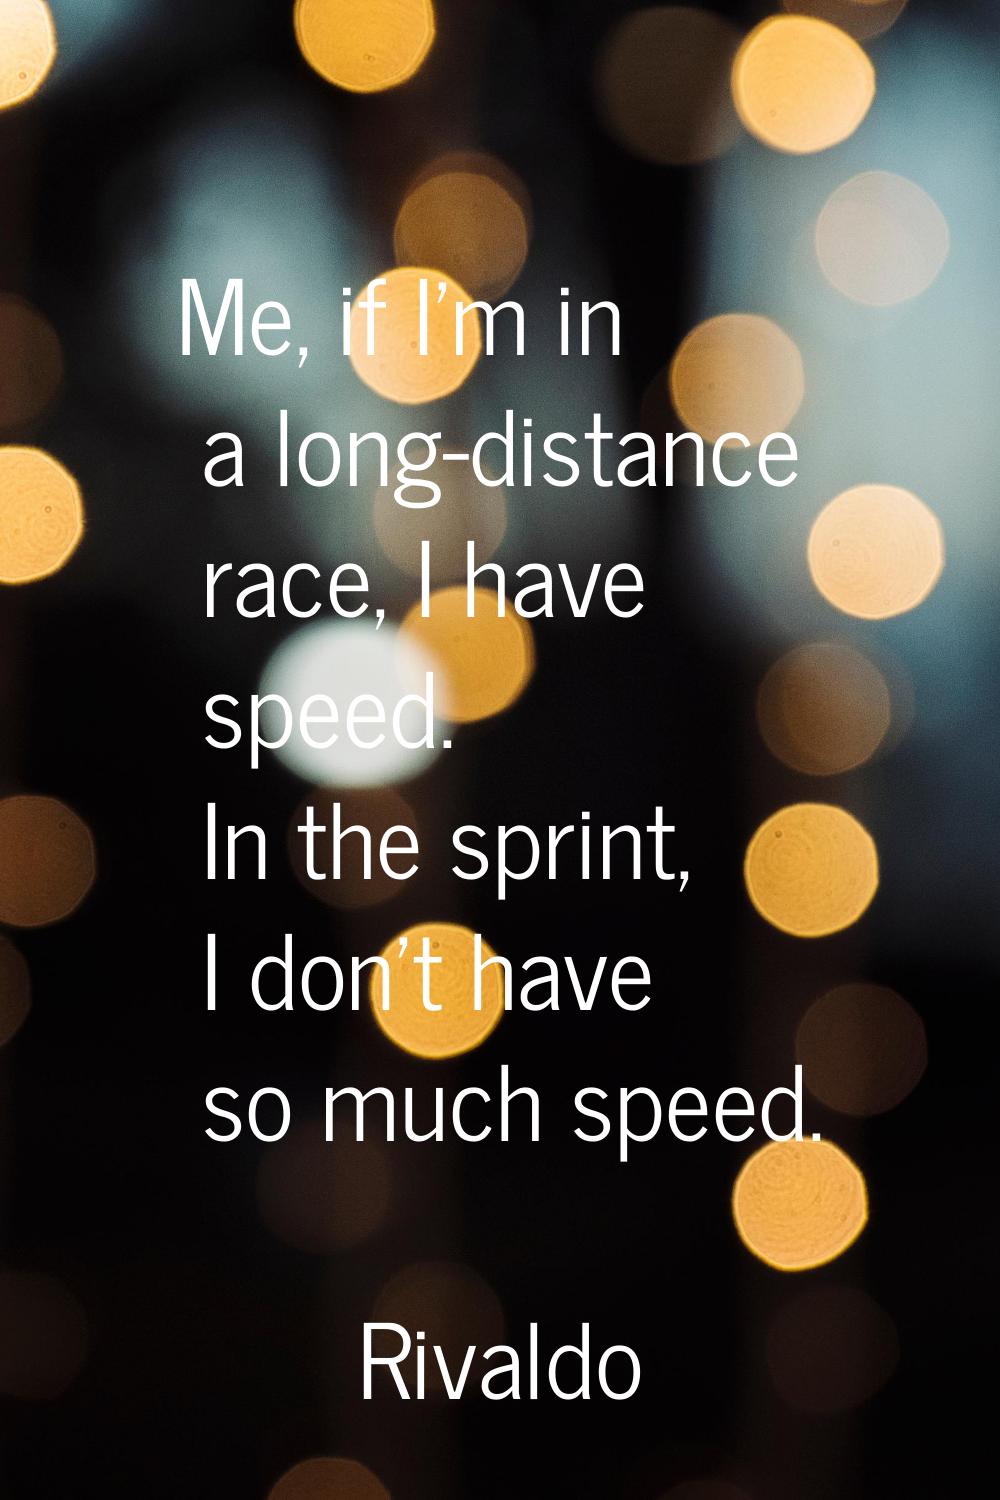 Me, if I'm in a long-distance race, I have speed. In the sprint, I don't have so much speed.